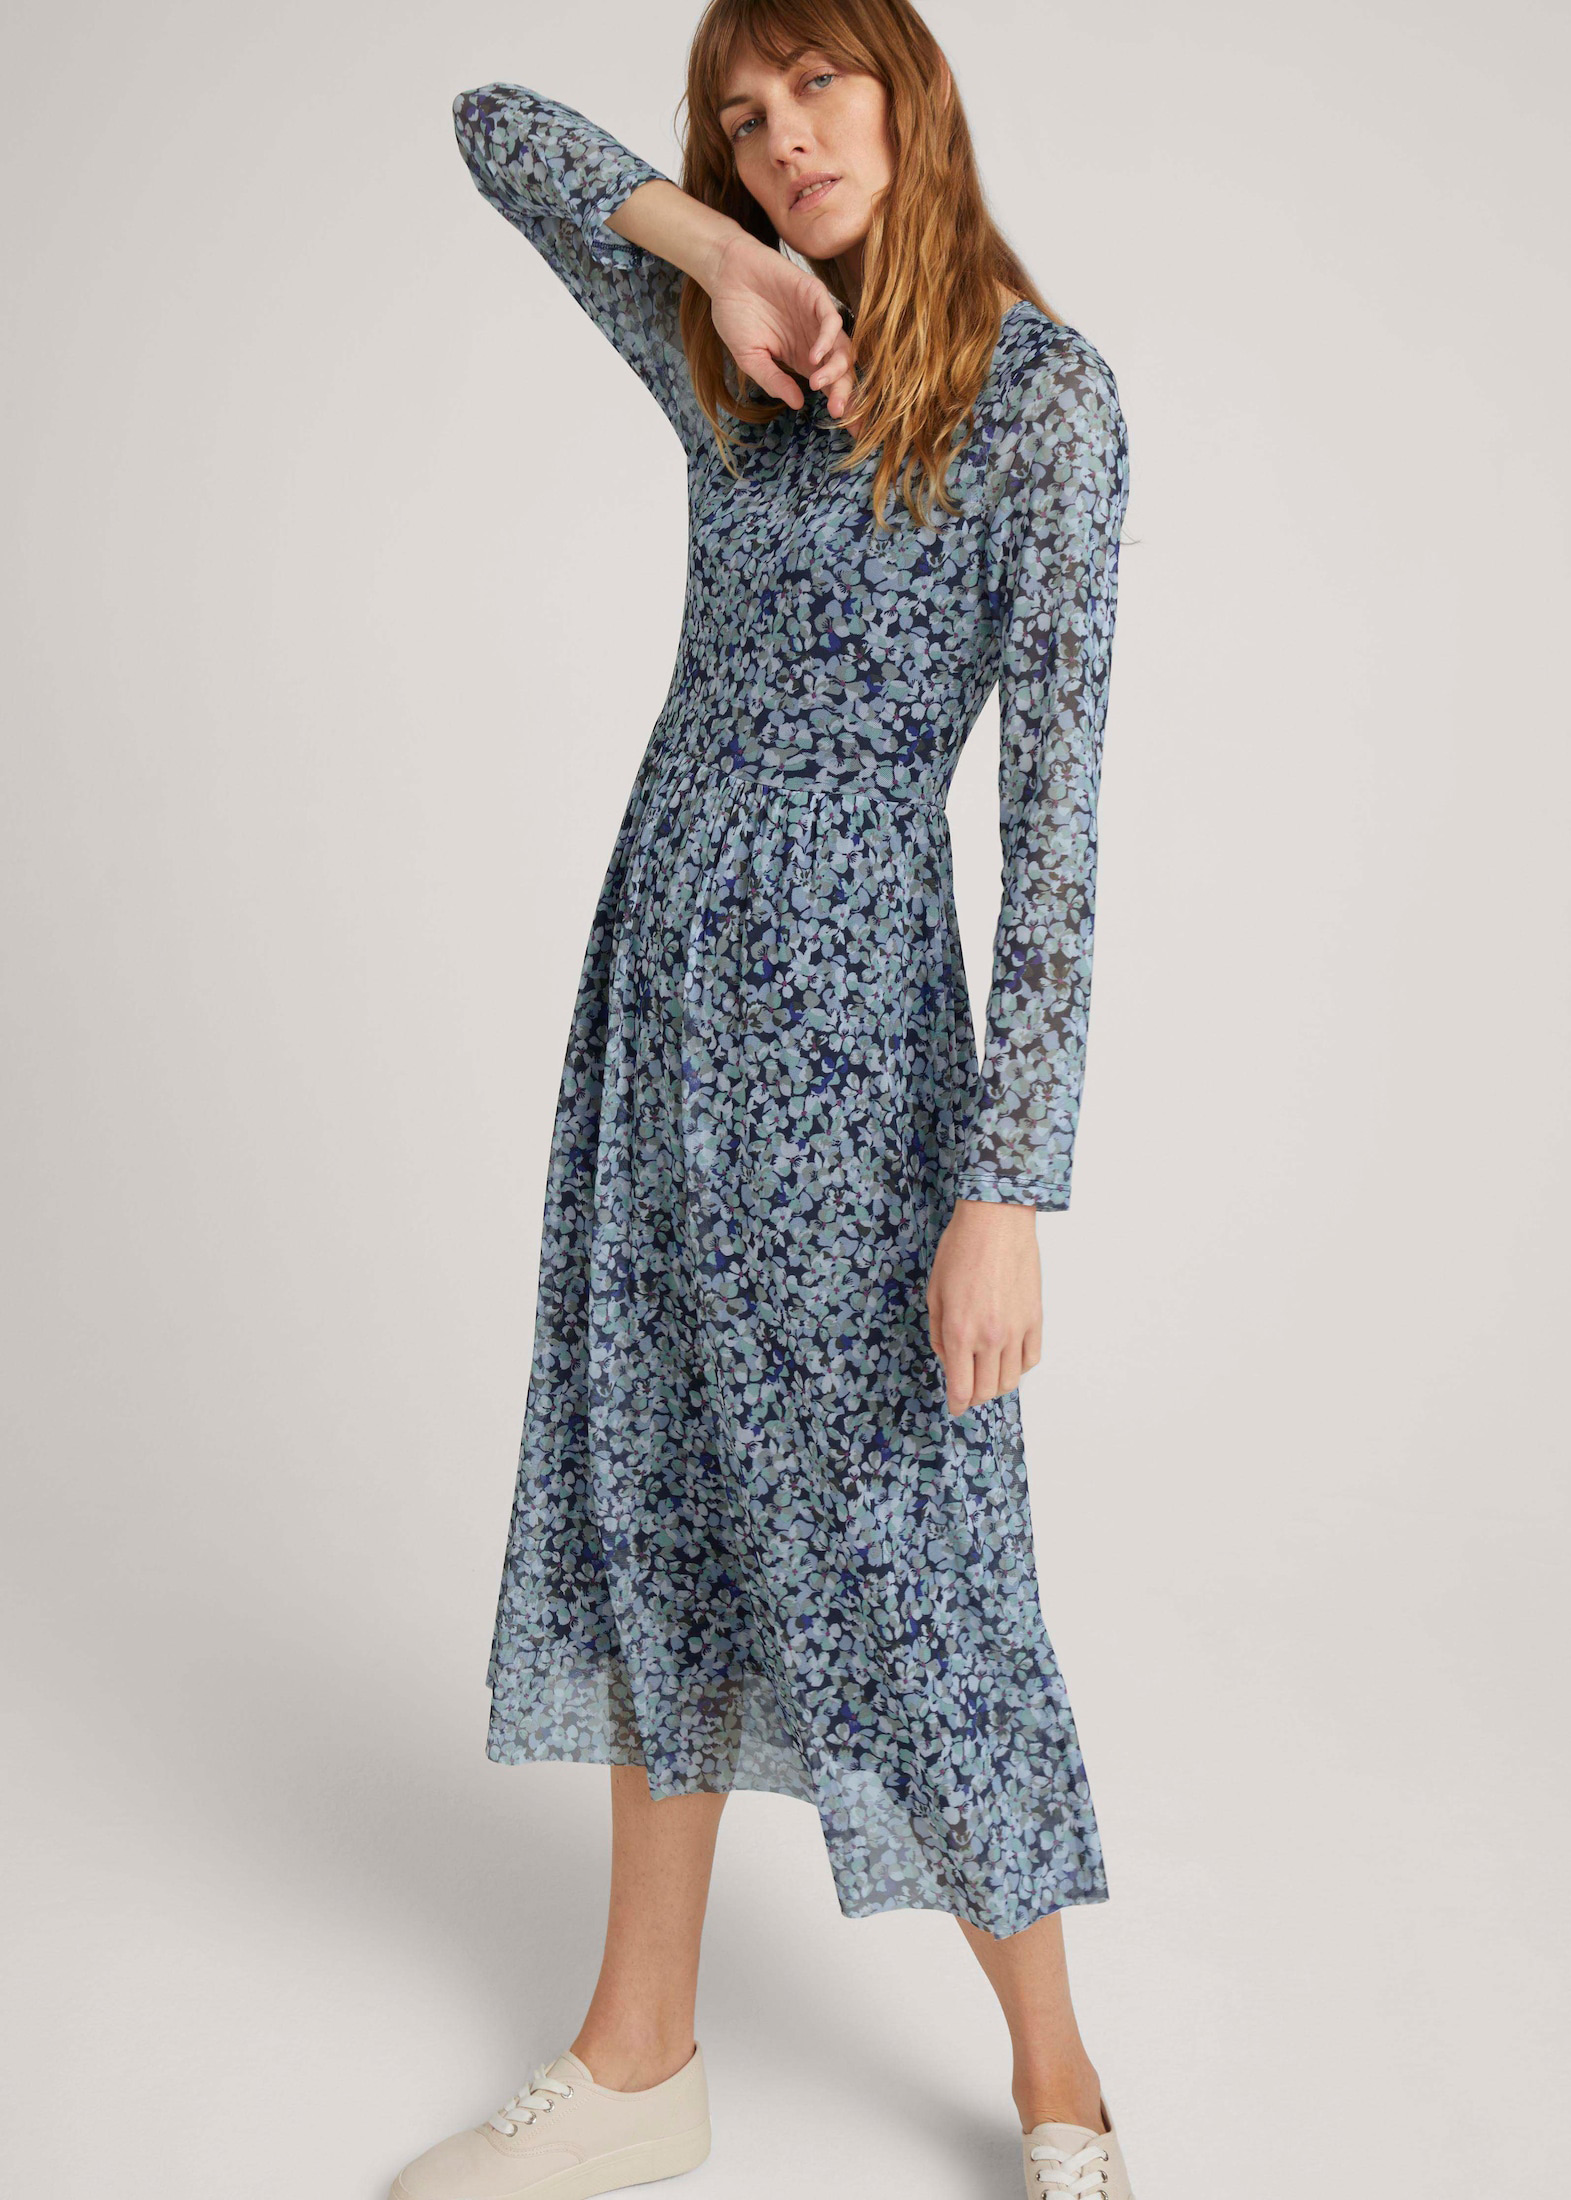 Tom Tailor® Dress Mesh Midi - Navy Floral Design (1023588-27263) is no  longer available:(